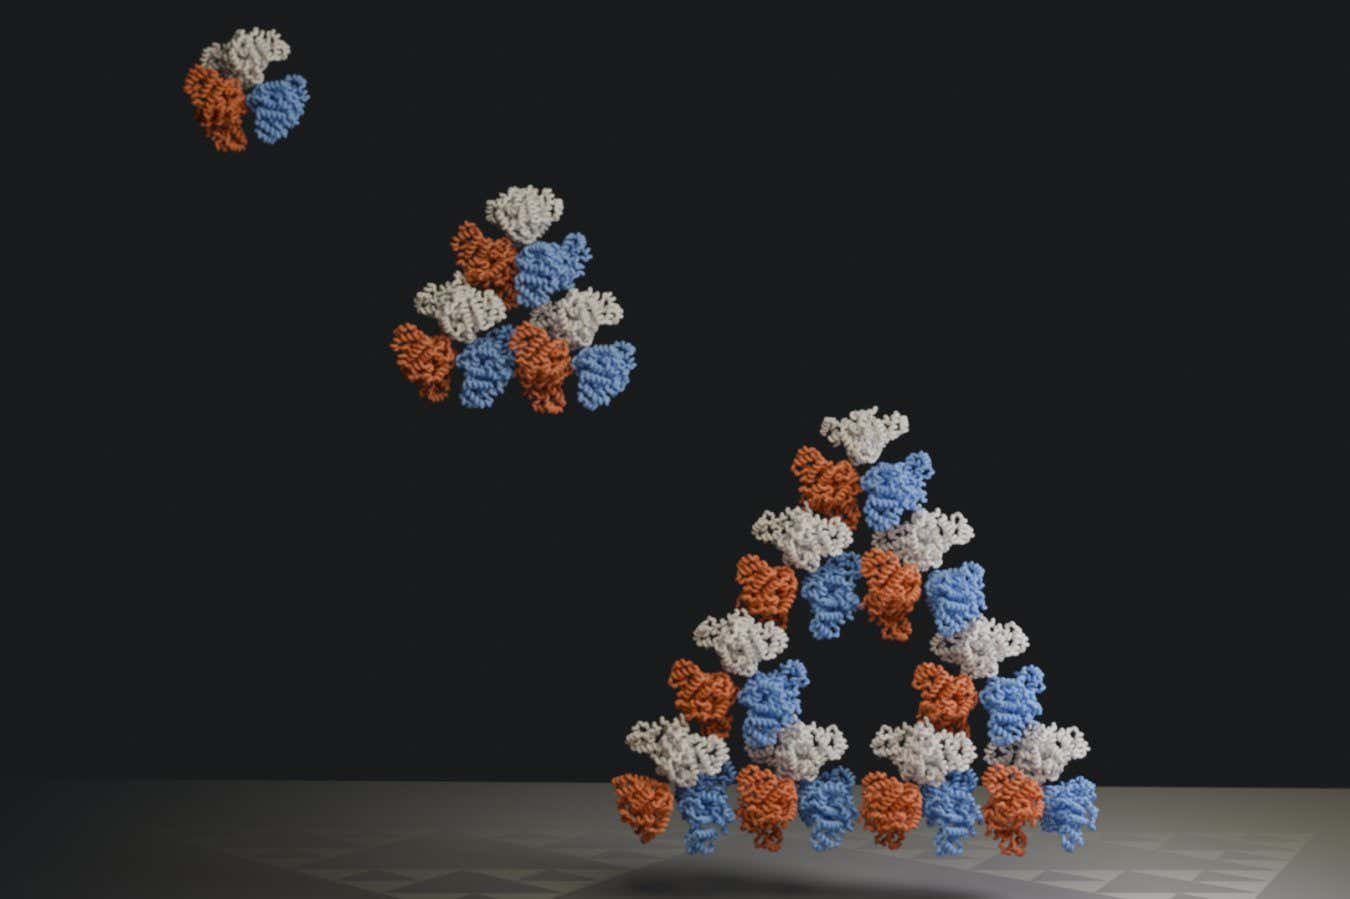 fractal pattern identified at molecular scale in nature for first time